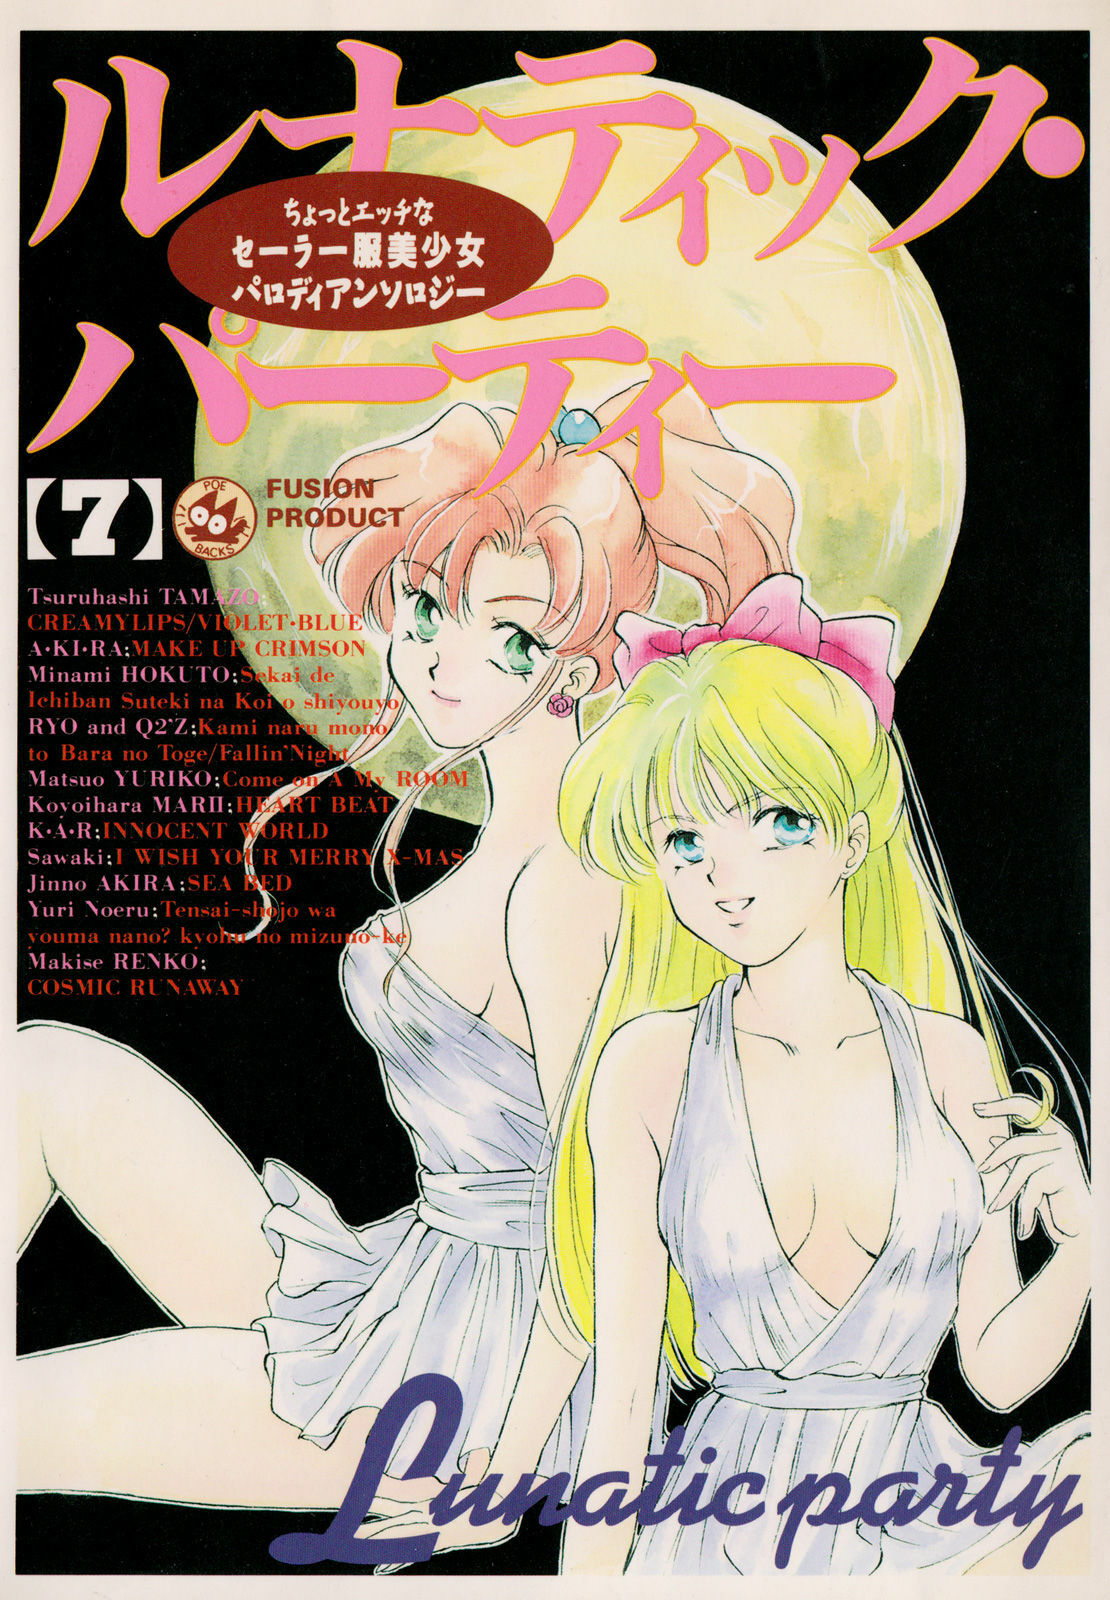 [Anthology] Lunatic Party 7 (Sailor Moon) page 1 full